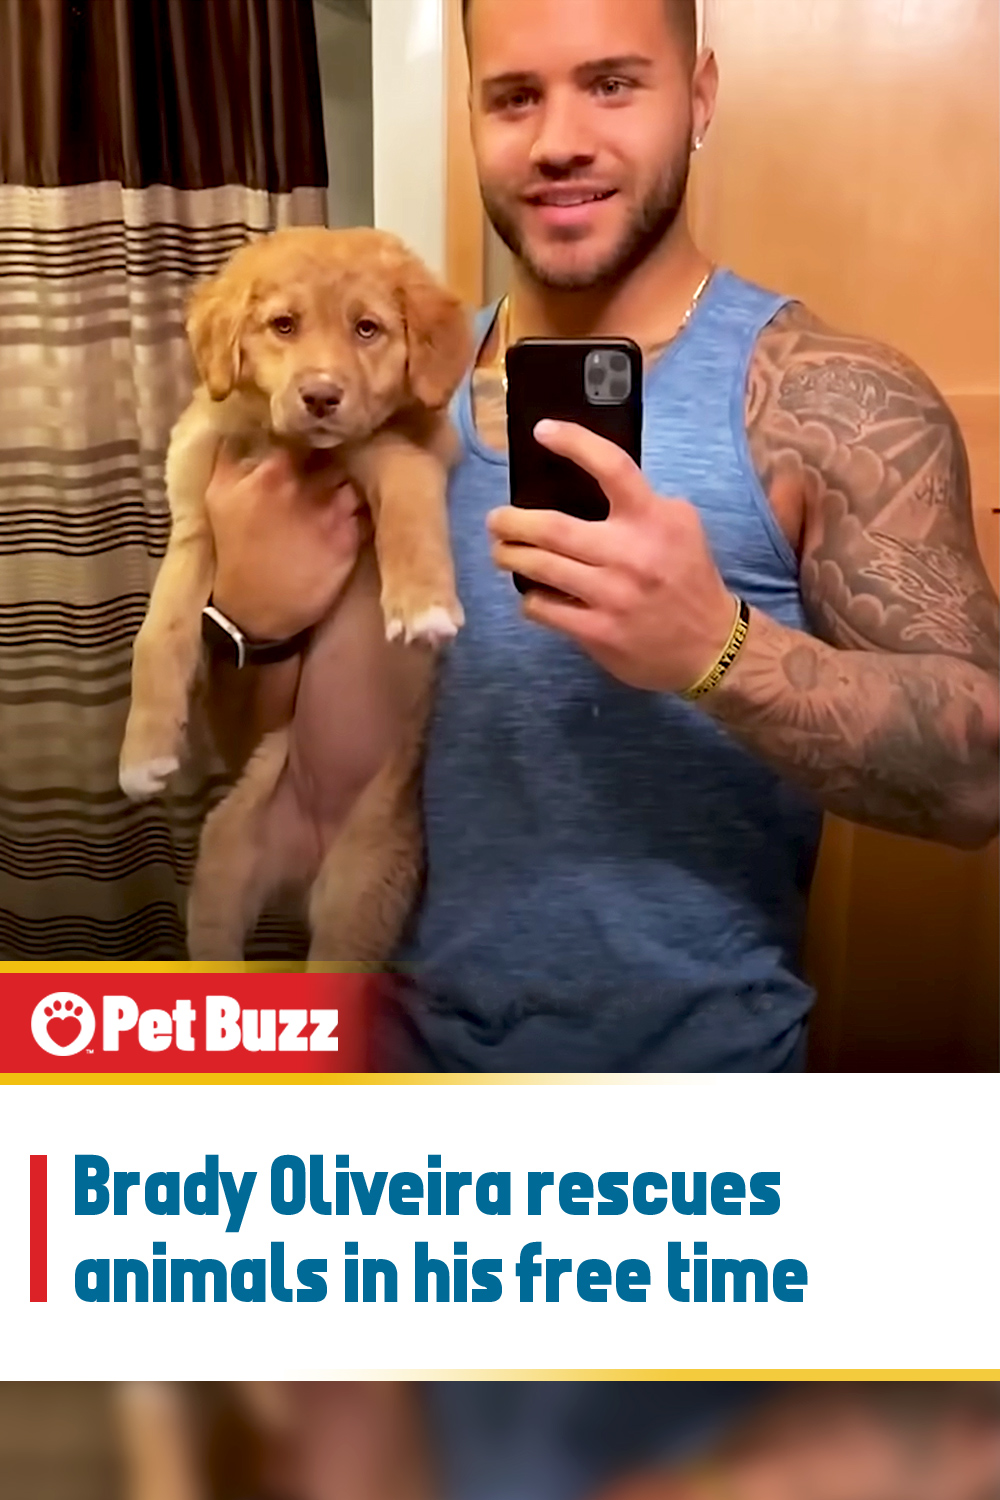 Brady Oliveira rescues animals in his free time